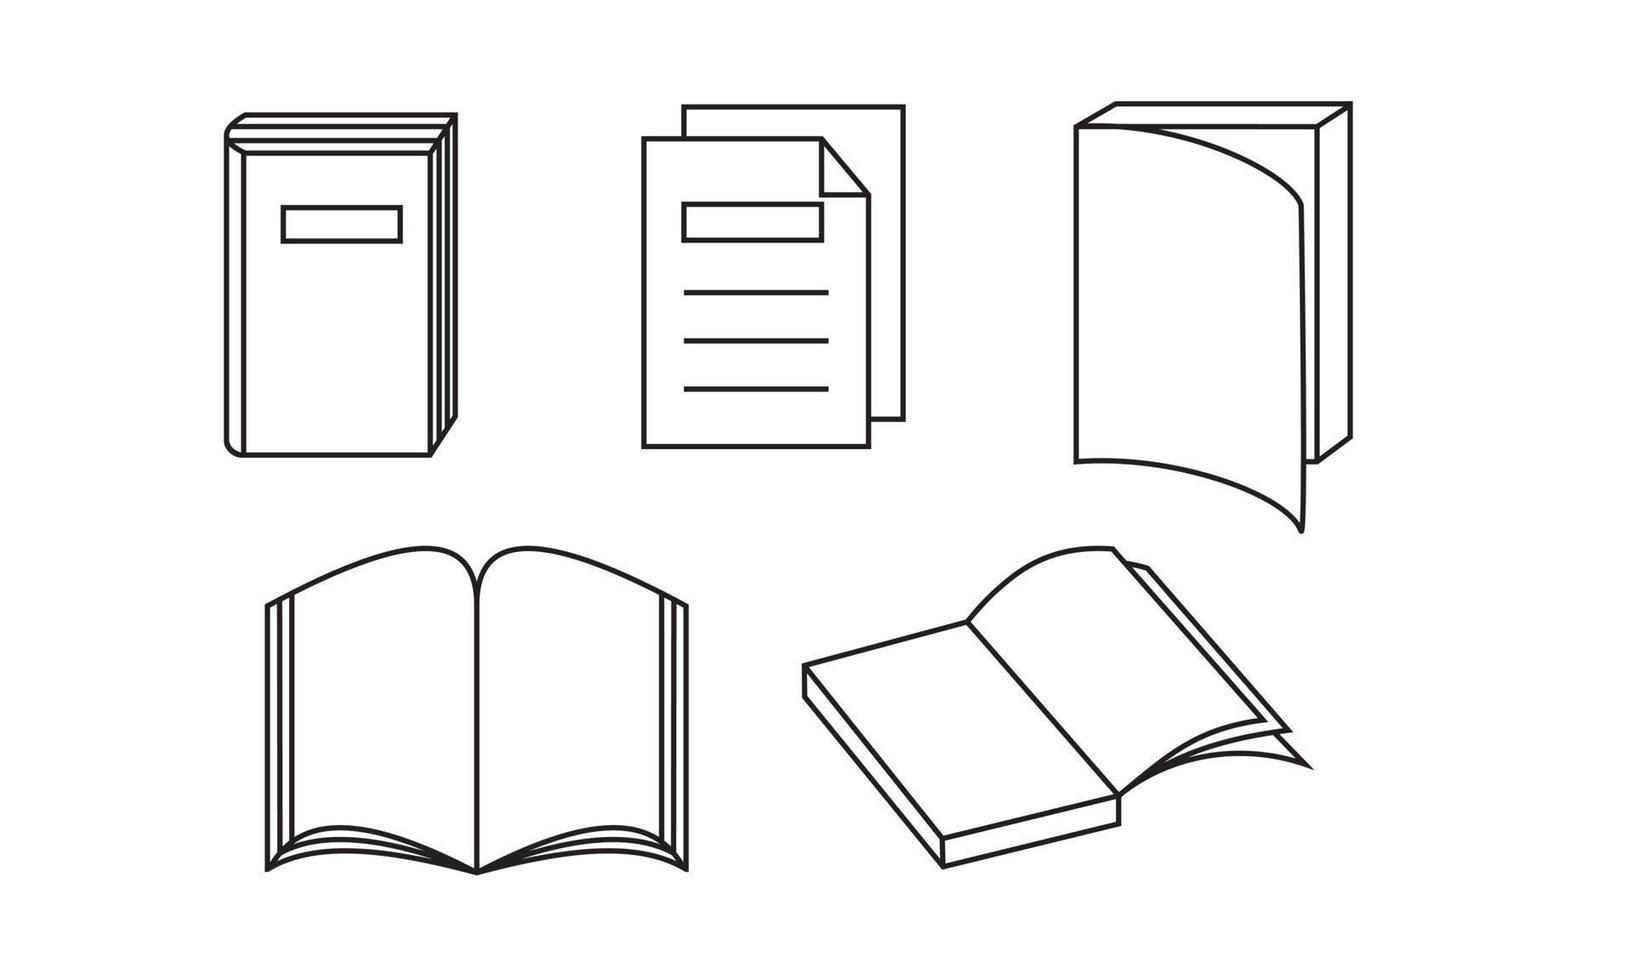 Outlined icon of e book. Suitable for design element of educational program, magazine, textbook app, and dictionary software. vector